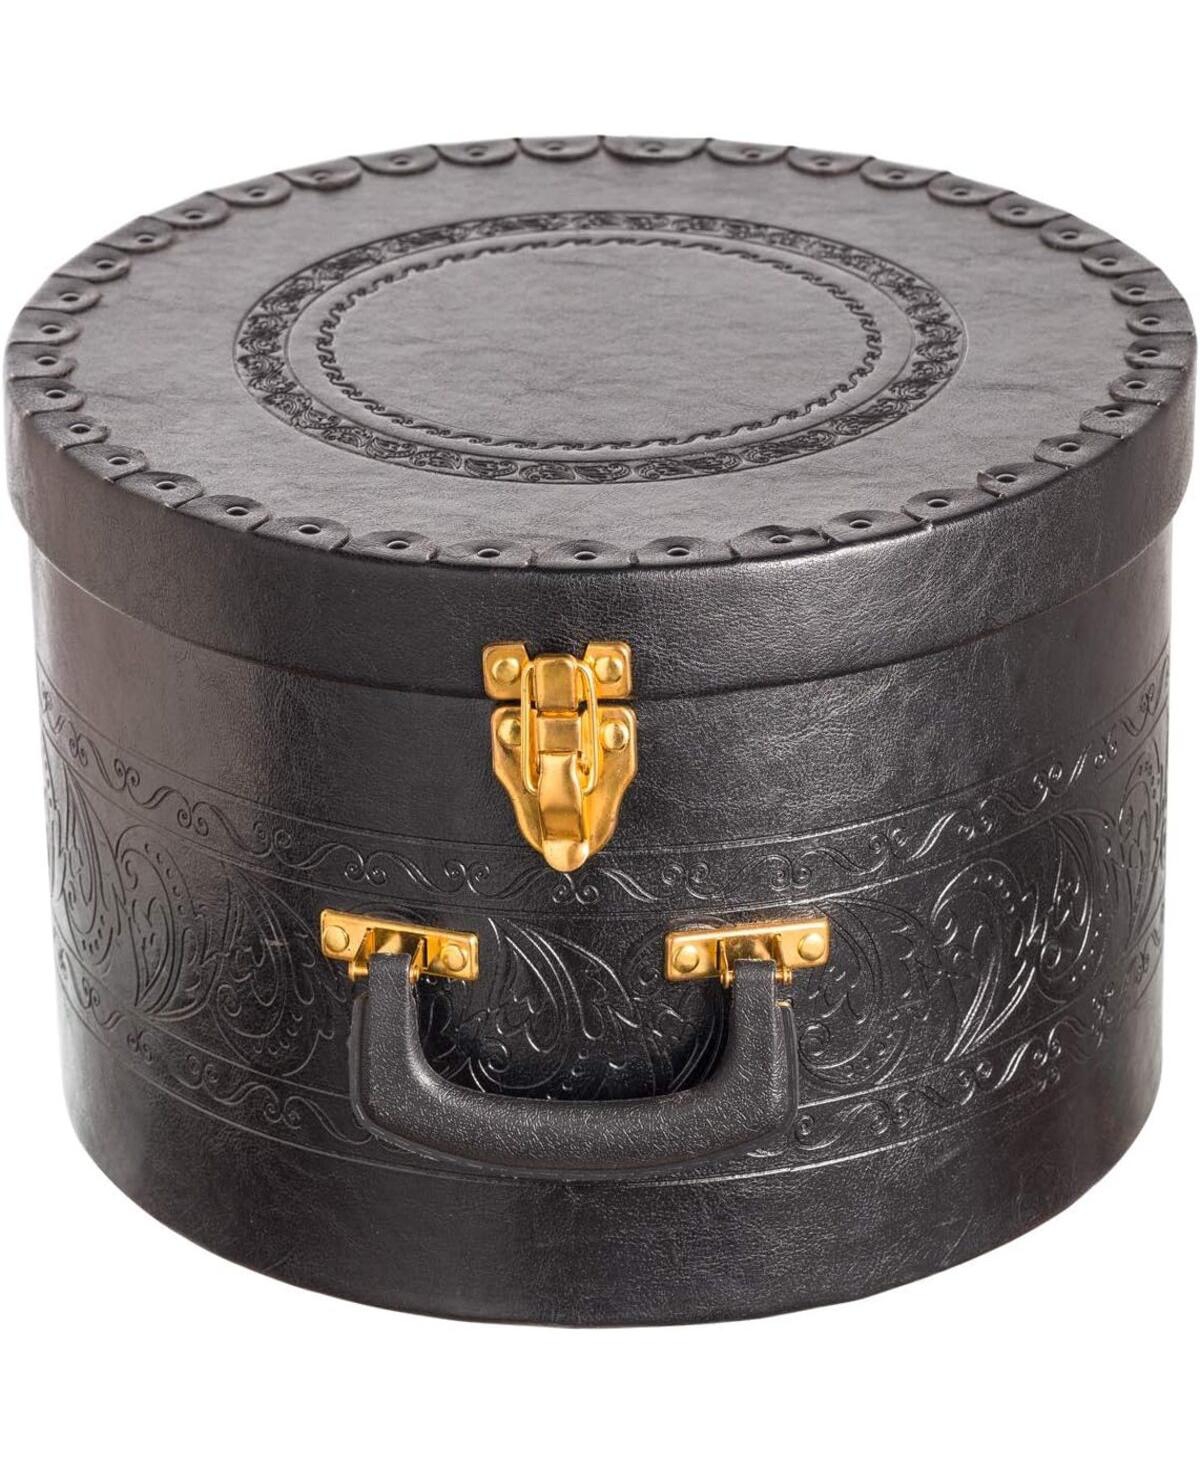 Creative Scents Black Round Hat Travel Case With Gold Locking Lid